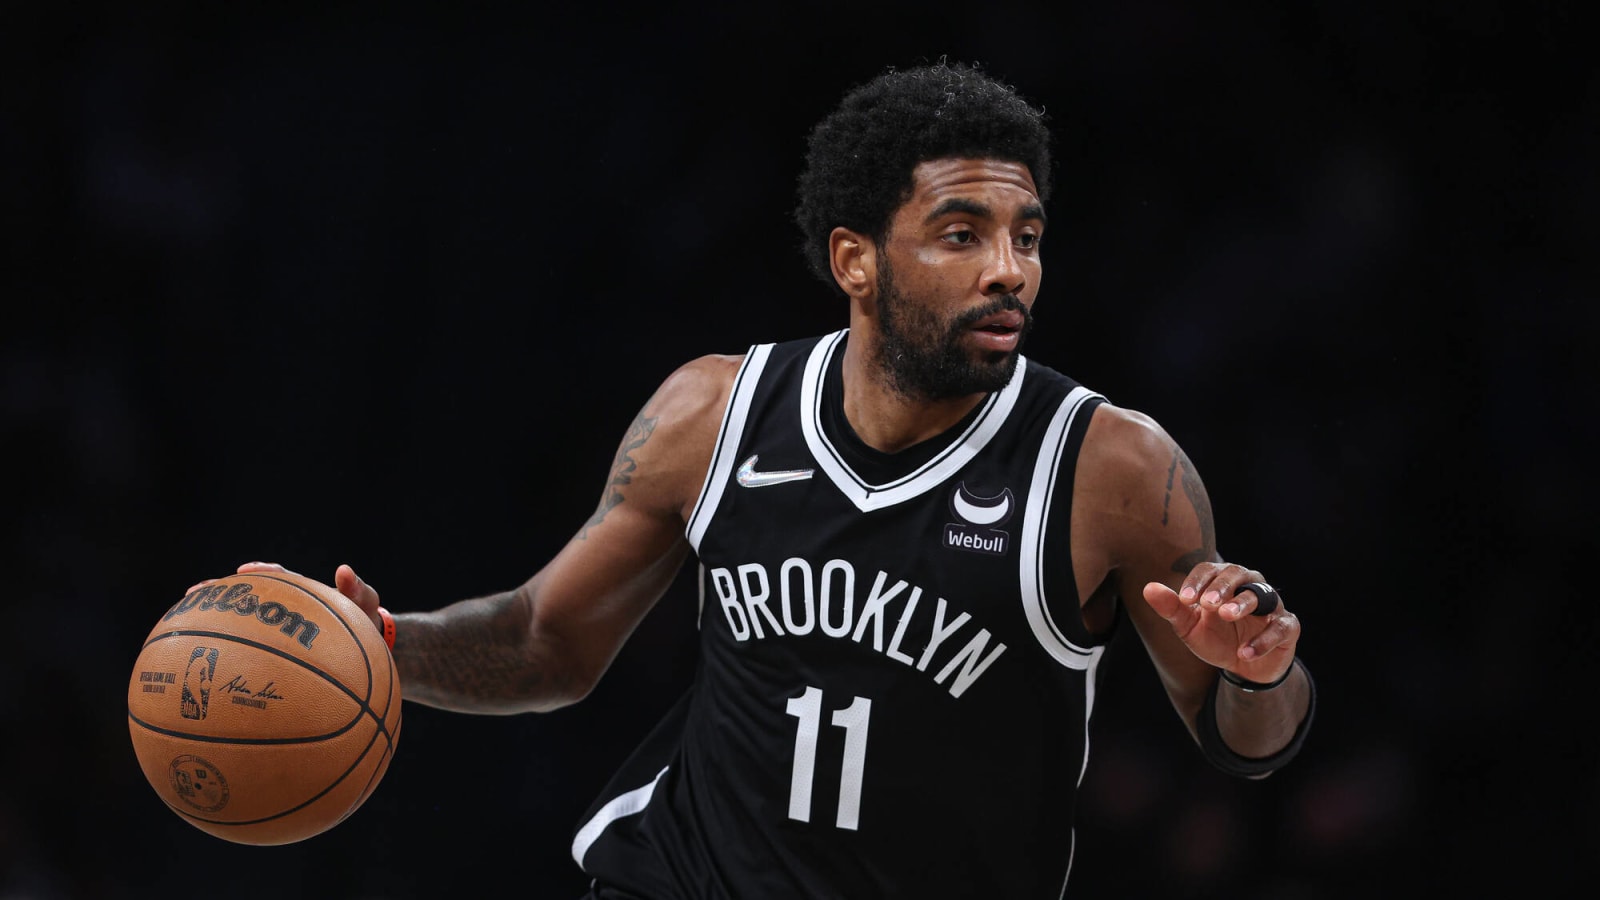 NBA Insider Jovan Buha Reveals What Lakers Must Send To Nets If They Want To Land Kyrie Irving: "If They Were Willing To Do Two First-Round Picks, Kyrie Would Be A Laker Right Now."